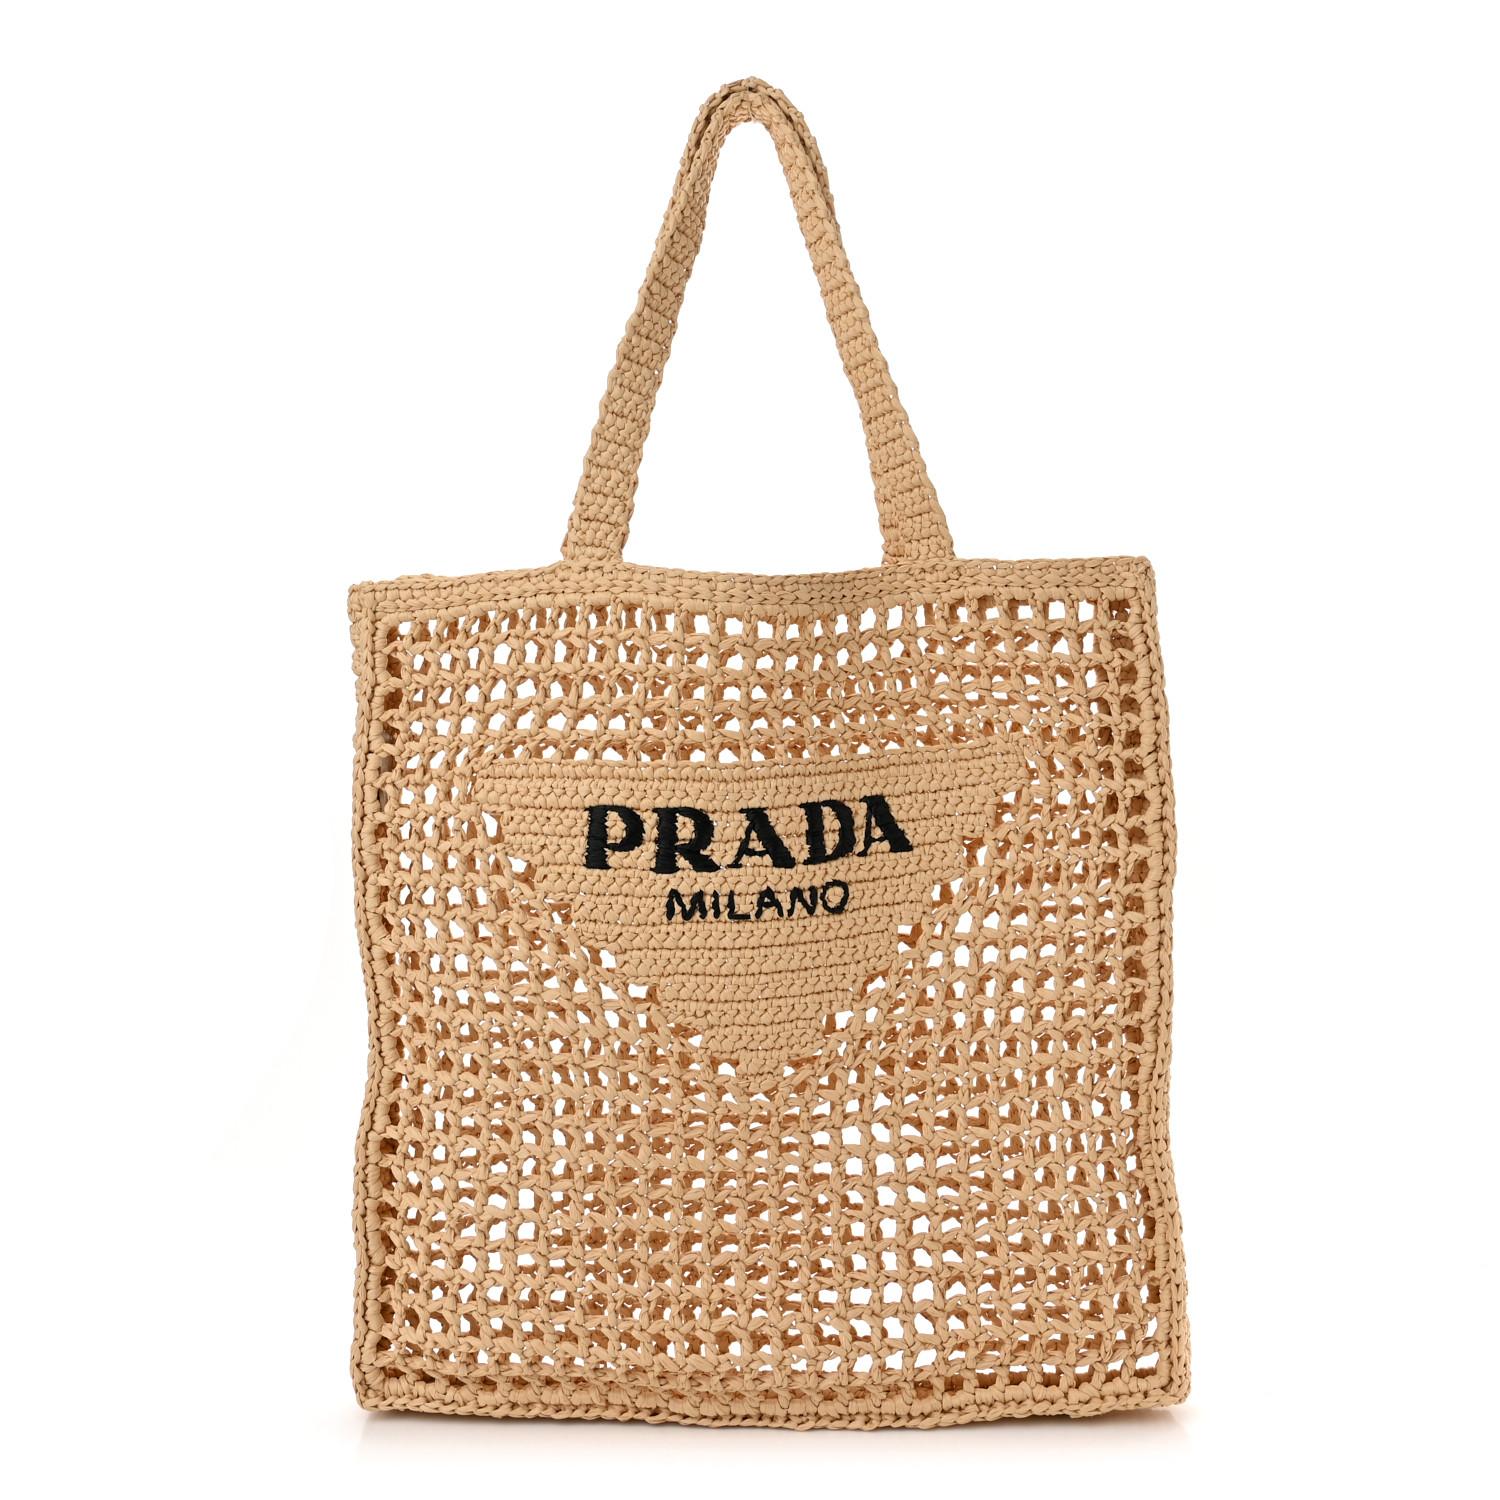 This is an authentic PRADA Raffia Embroidered Logo Tote Bag in Naturale. This stylish tote is crafted of natural color raffia. The bag features a black Prada on the front and an unlined interior.

Base length: 14 in
Height: 14.25 in
Width: 1.5